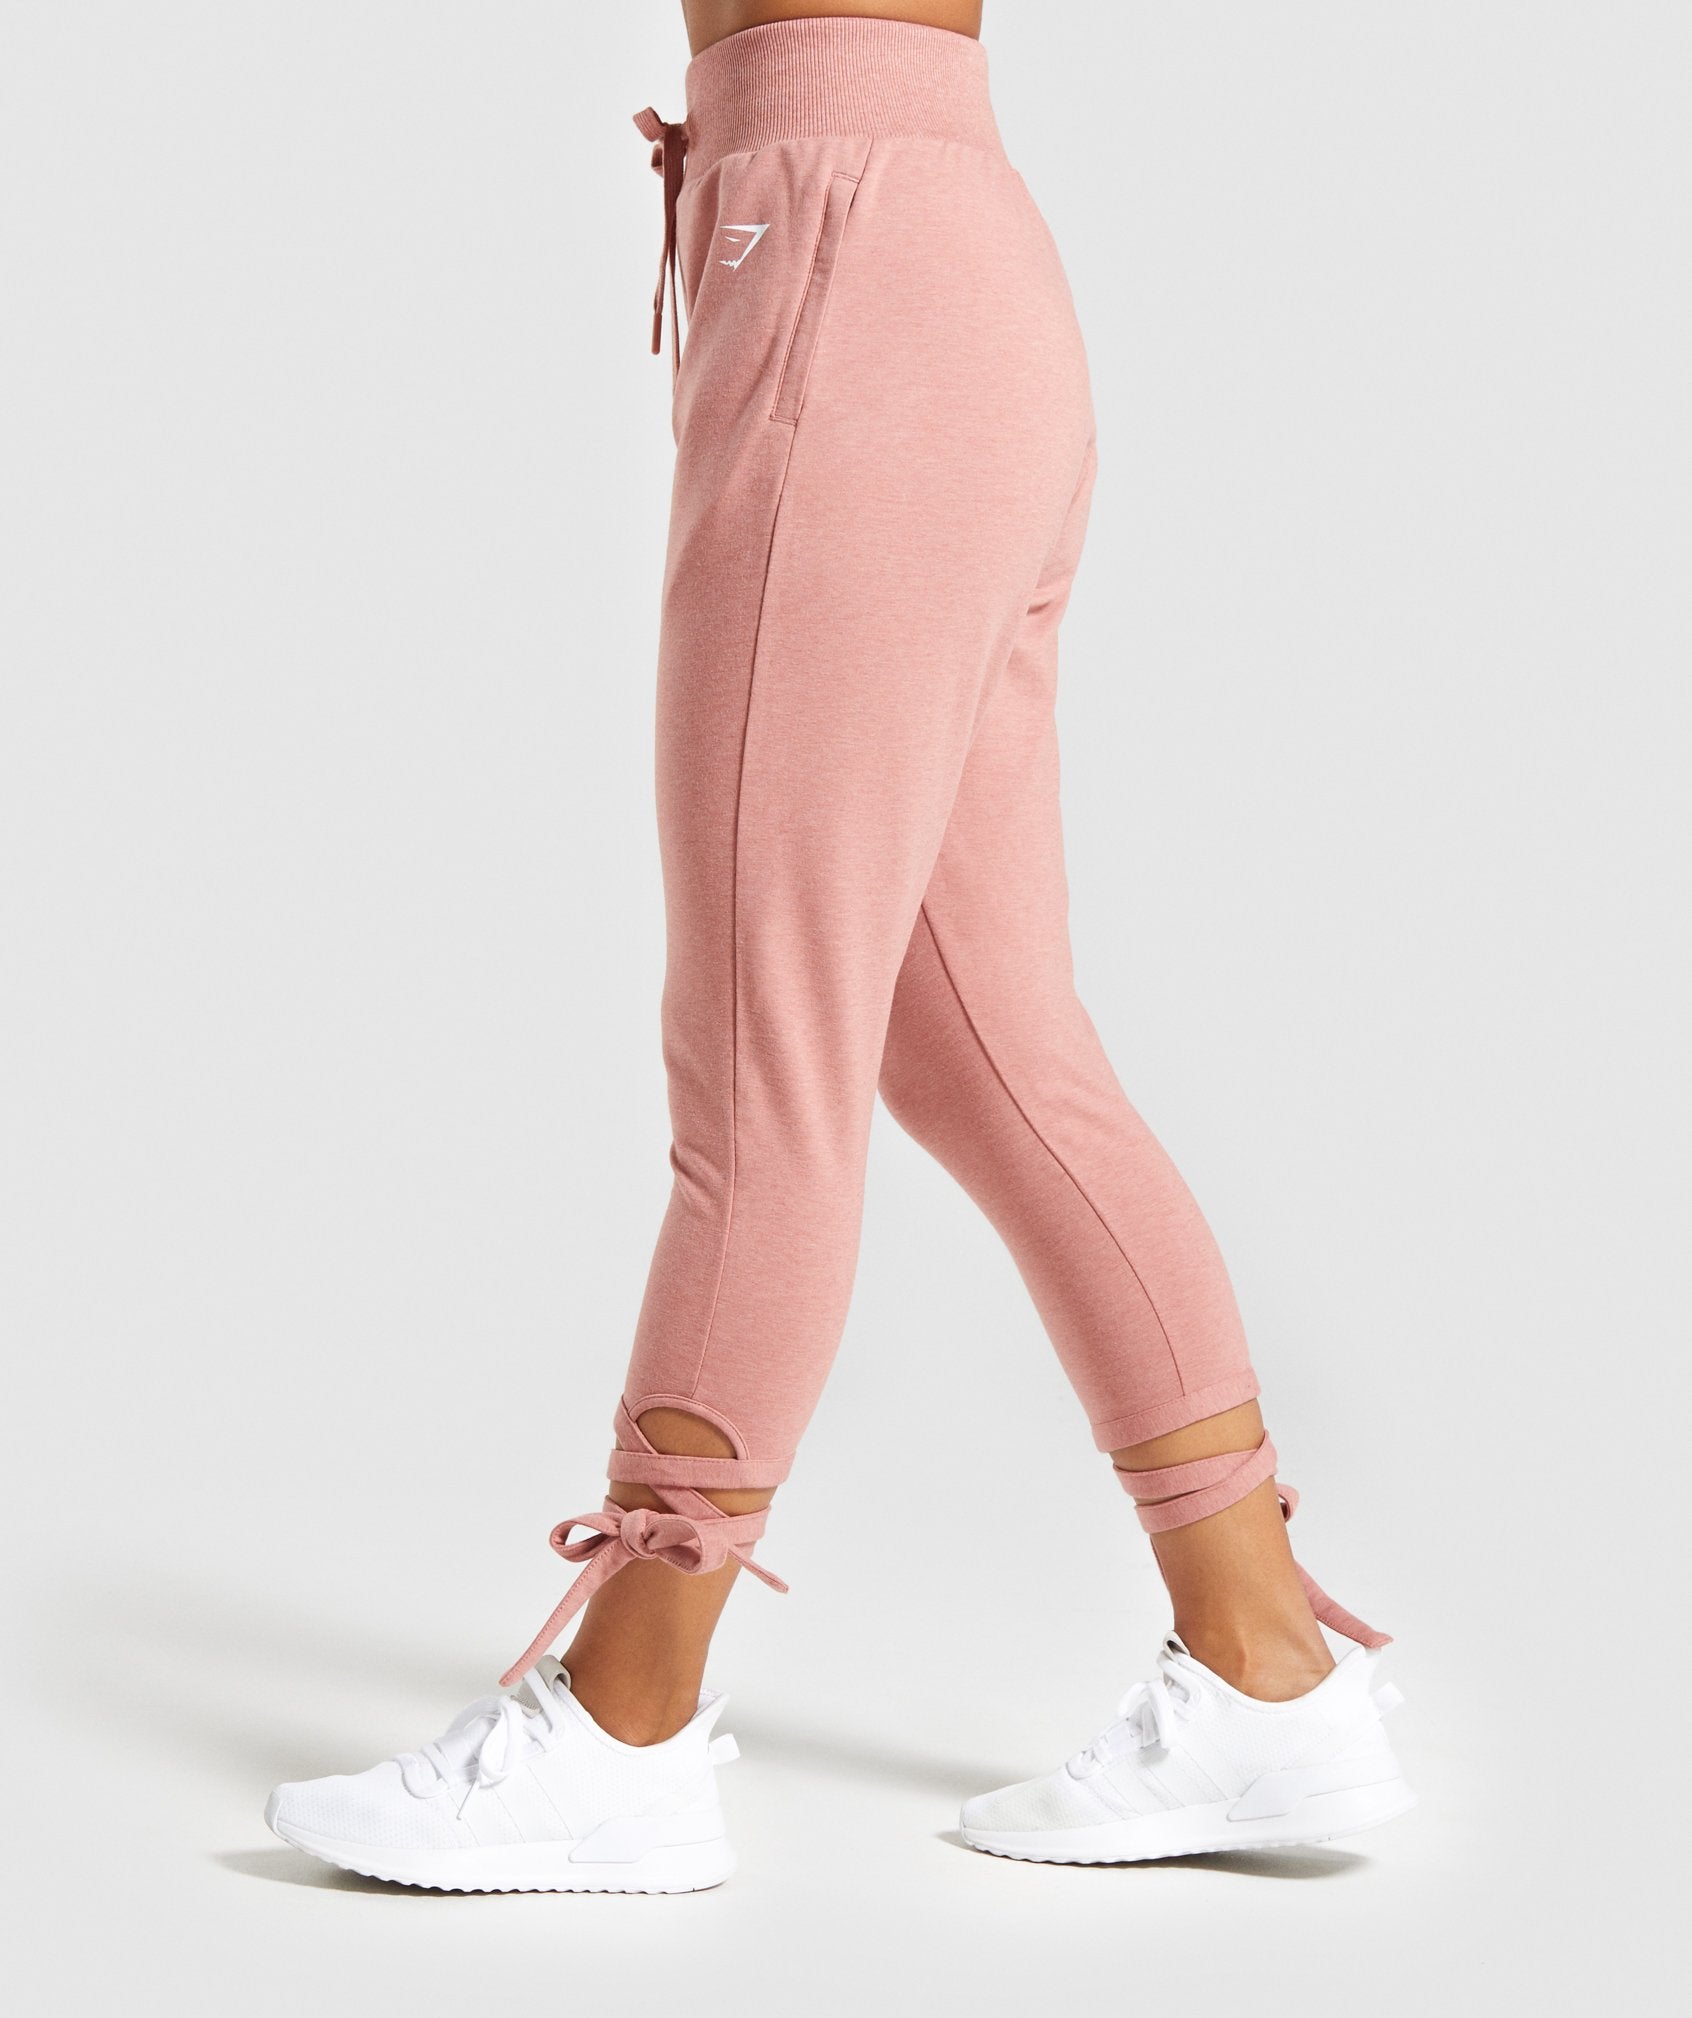 Ark High Waisted Joggers in Pink - view 3